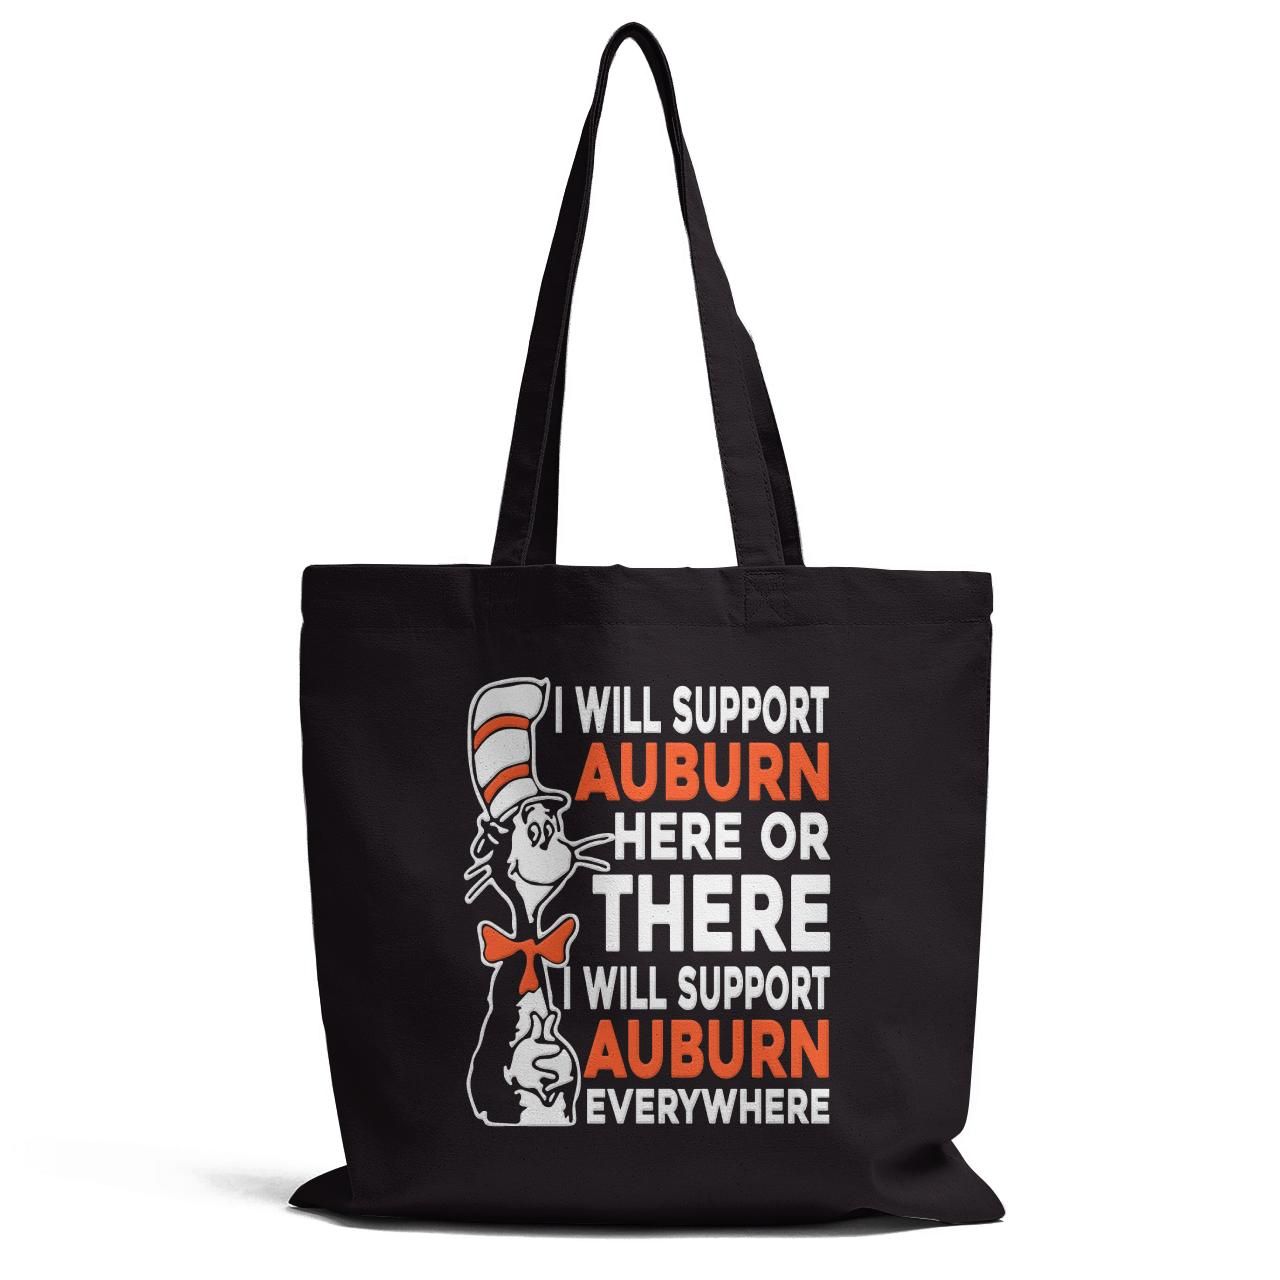 I Will Support Auburn Here Or There Tote Bag